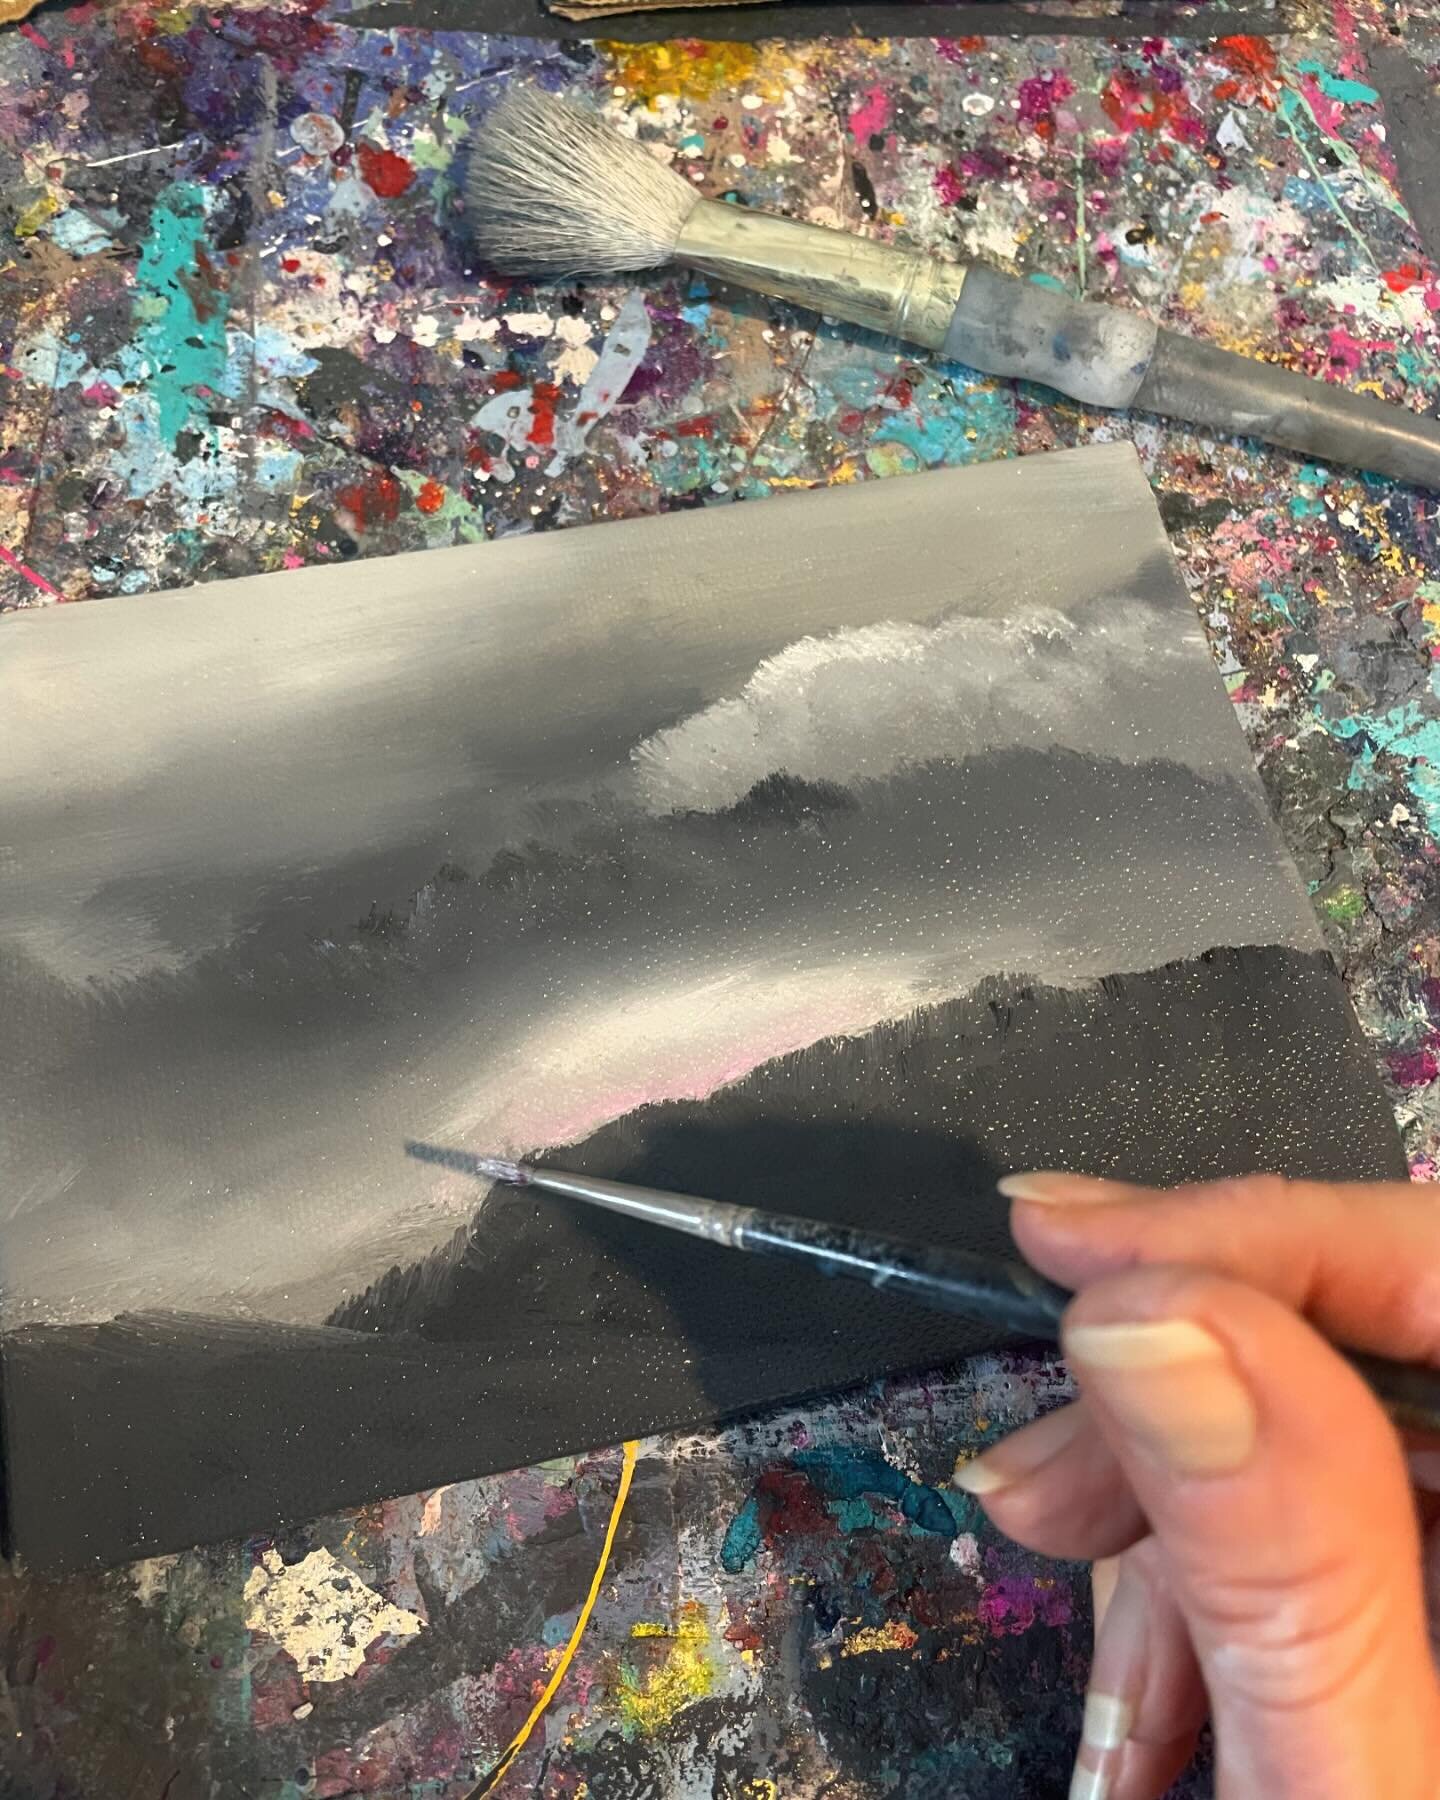 Using up leftover paint on something small, I quite like it though I didn&rsquo;t have a plan!😊
.
.

.
#irishart #irishartists #irishart #smallpainting #smallpaintings #intuitiveart #intuitiveartist #abstractlandscape #abstractlandscapes #artworkinp